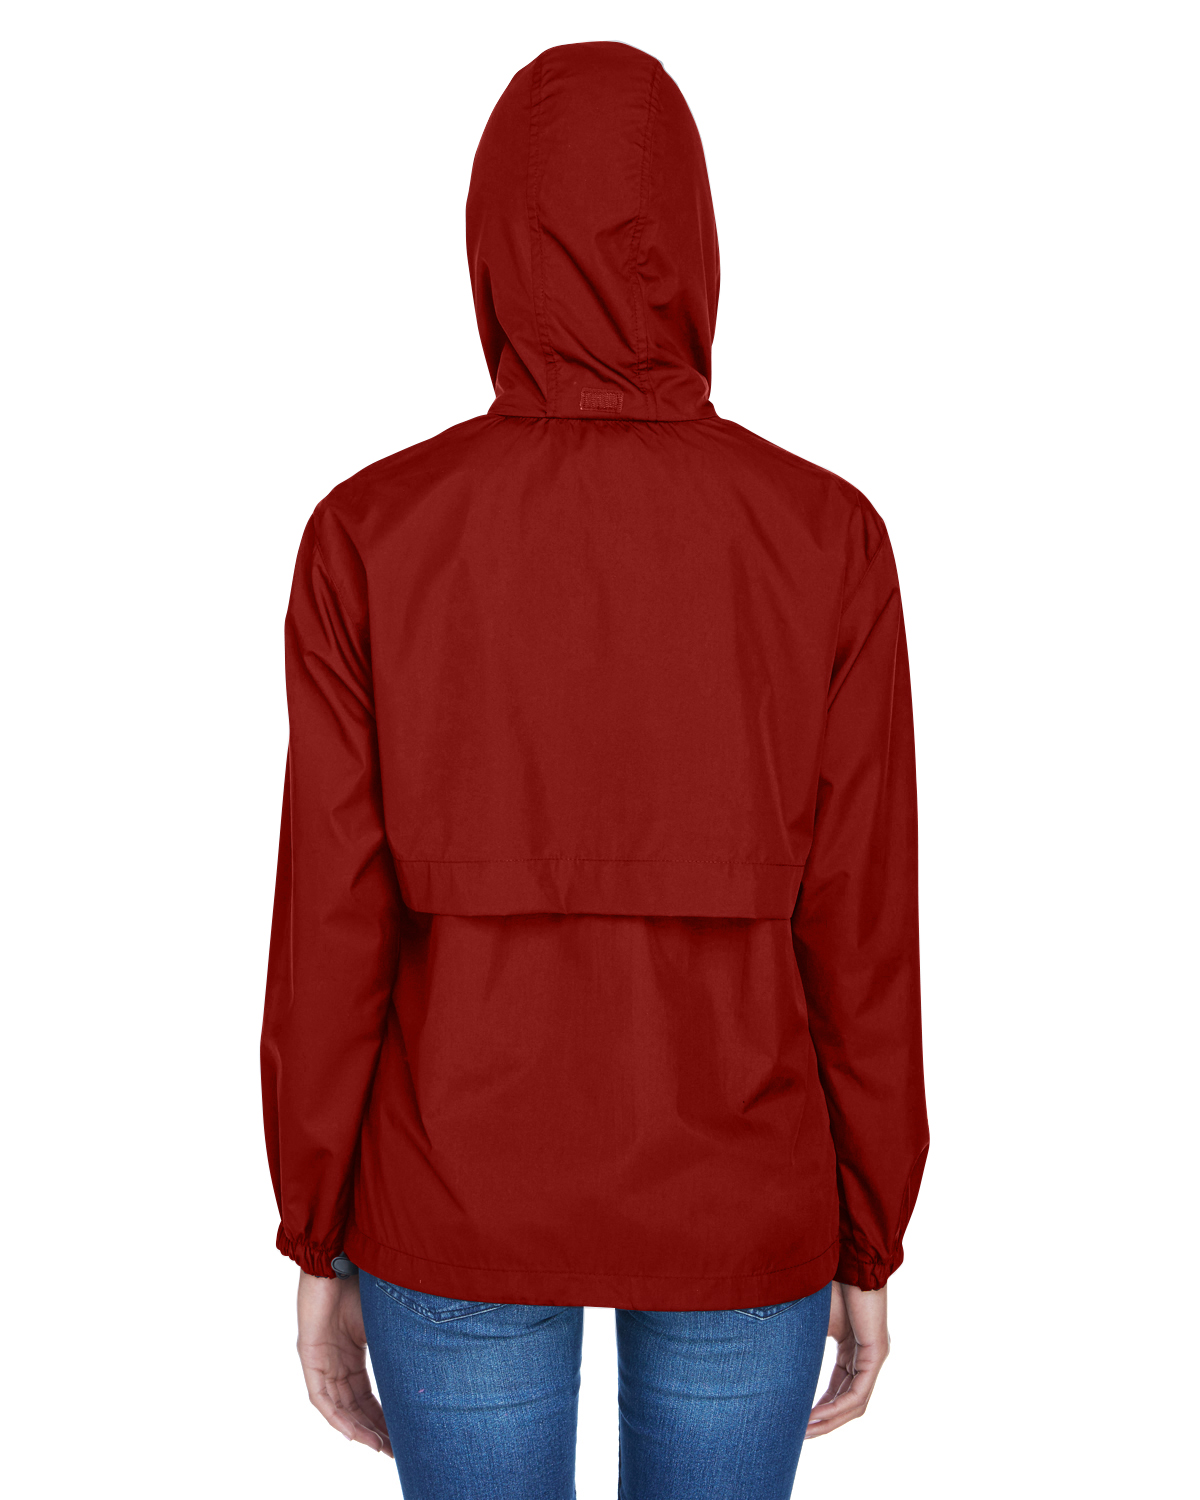 The Ash City - North End Ladies' Techno Lite Jacket - MOLTEN RED 751 - L - image 2 of 2